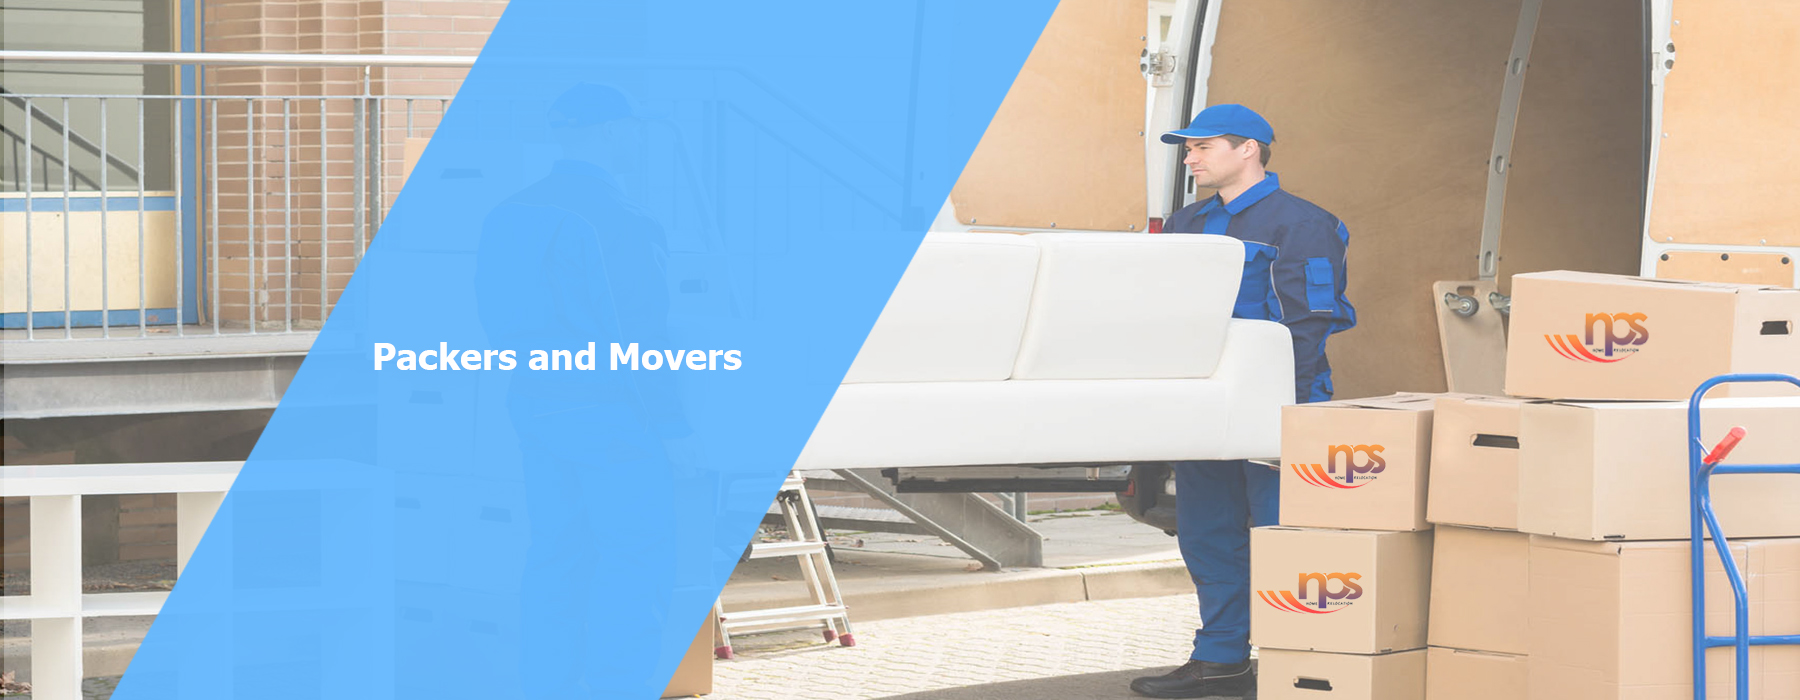 Packers and Movers in Noida Sector 121